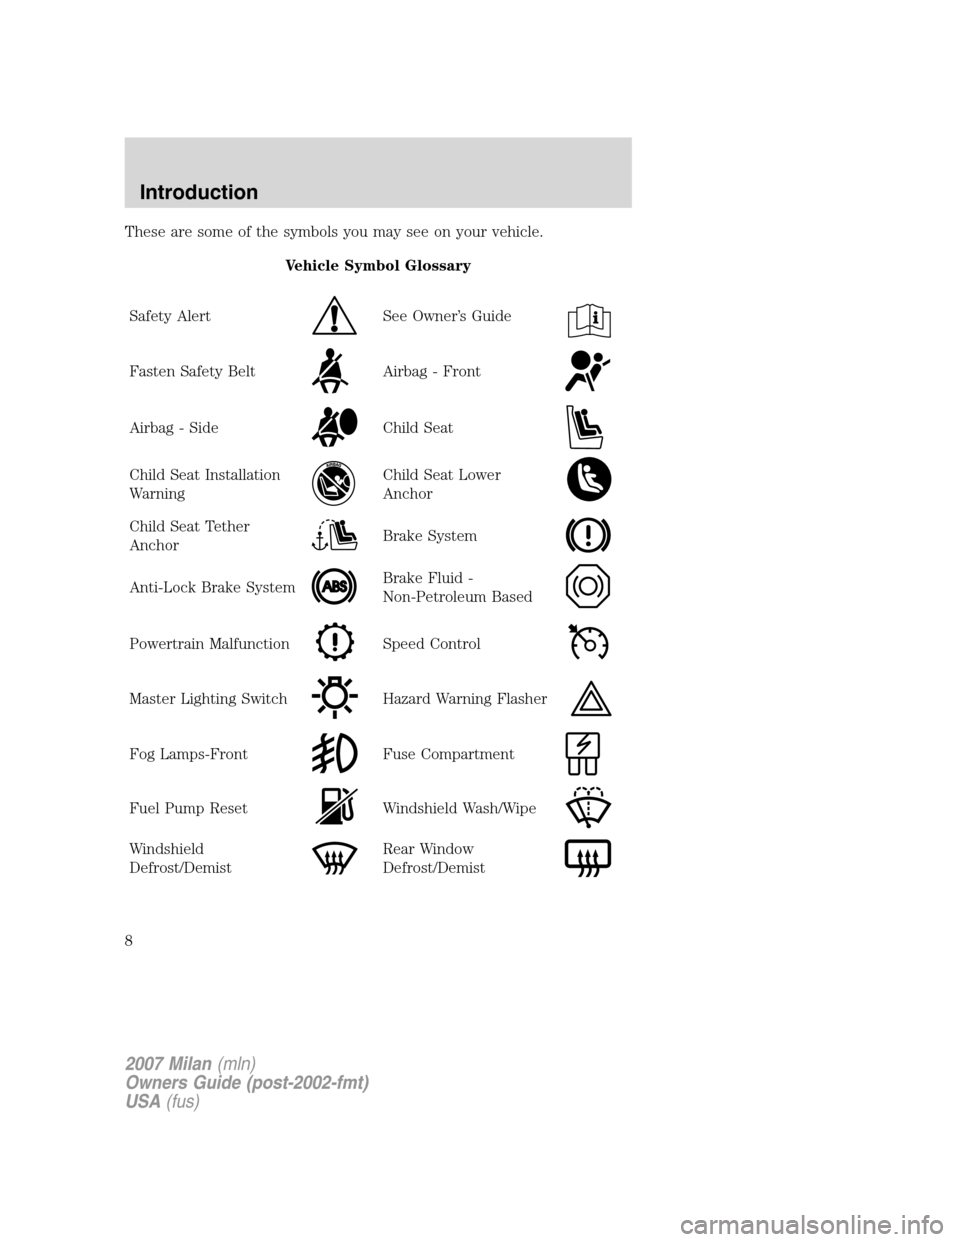 Mercury Milan 2007  Owners Manuals These are some of the symbols you may see on your vehicle.
Vehicle Symbol Glossary
Safety Alert
See Owner’s Guide
Fasten Safety BeltAirbag - Front
Airbag - SideChild Seat
Child Seat Installation
War